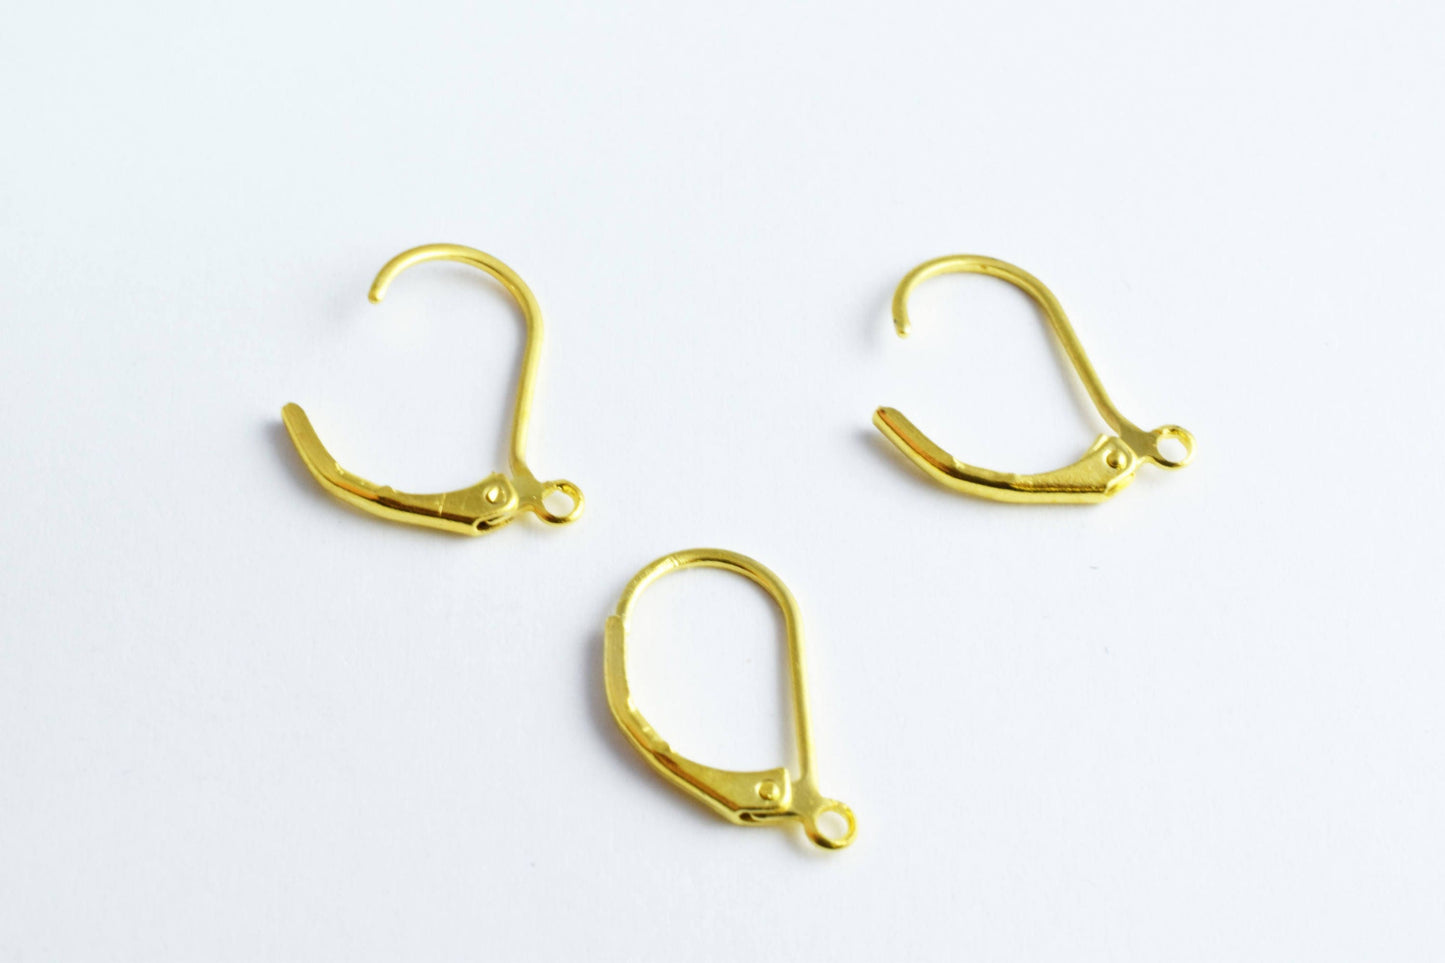 17x11mm Silver and Gold Plated Leverback Earring Finding to make your own Earring, Elegant Leverback earring findings, leverback ear wires